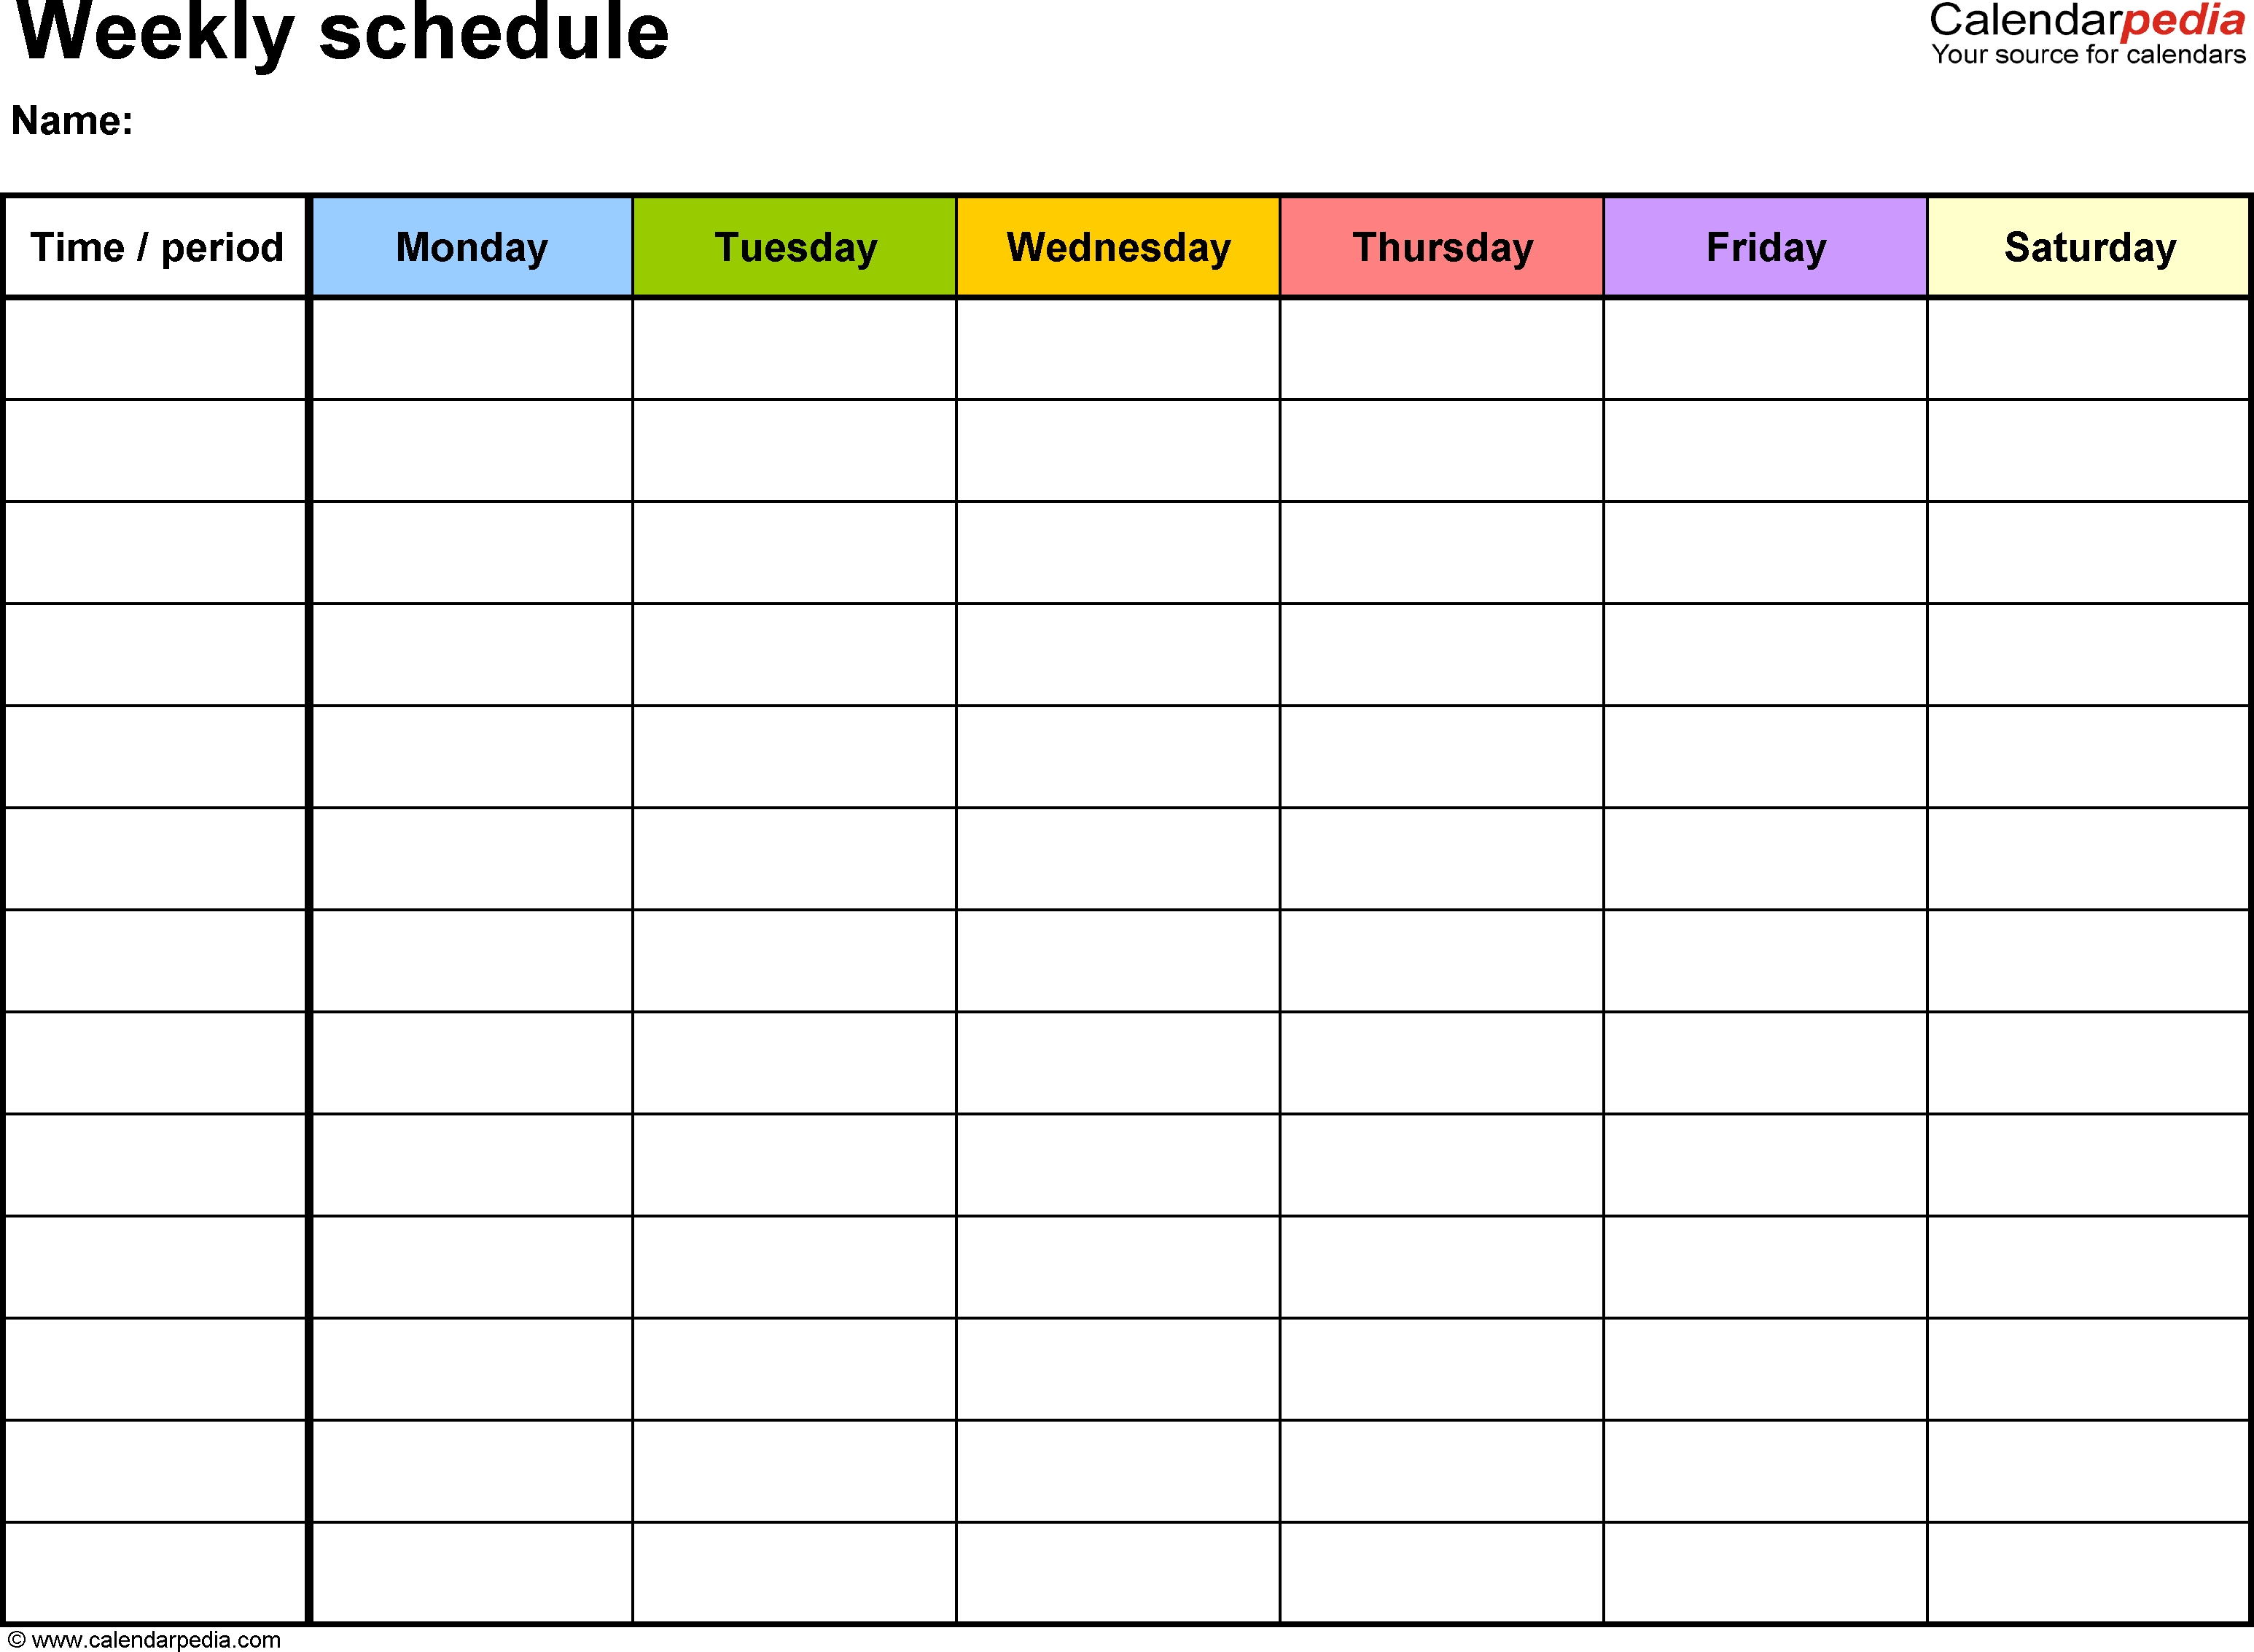 Free Weekly Schedule Templates For Word - 18 Templates for Printable Monday Through Friday Chart